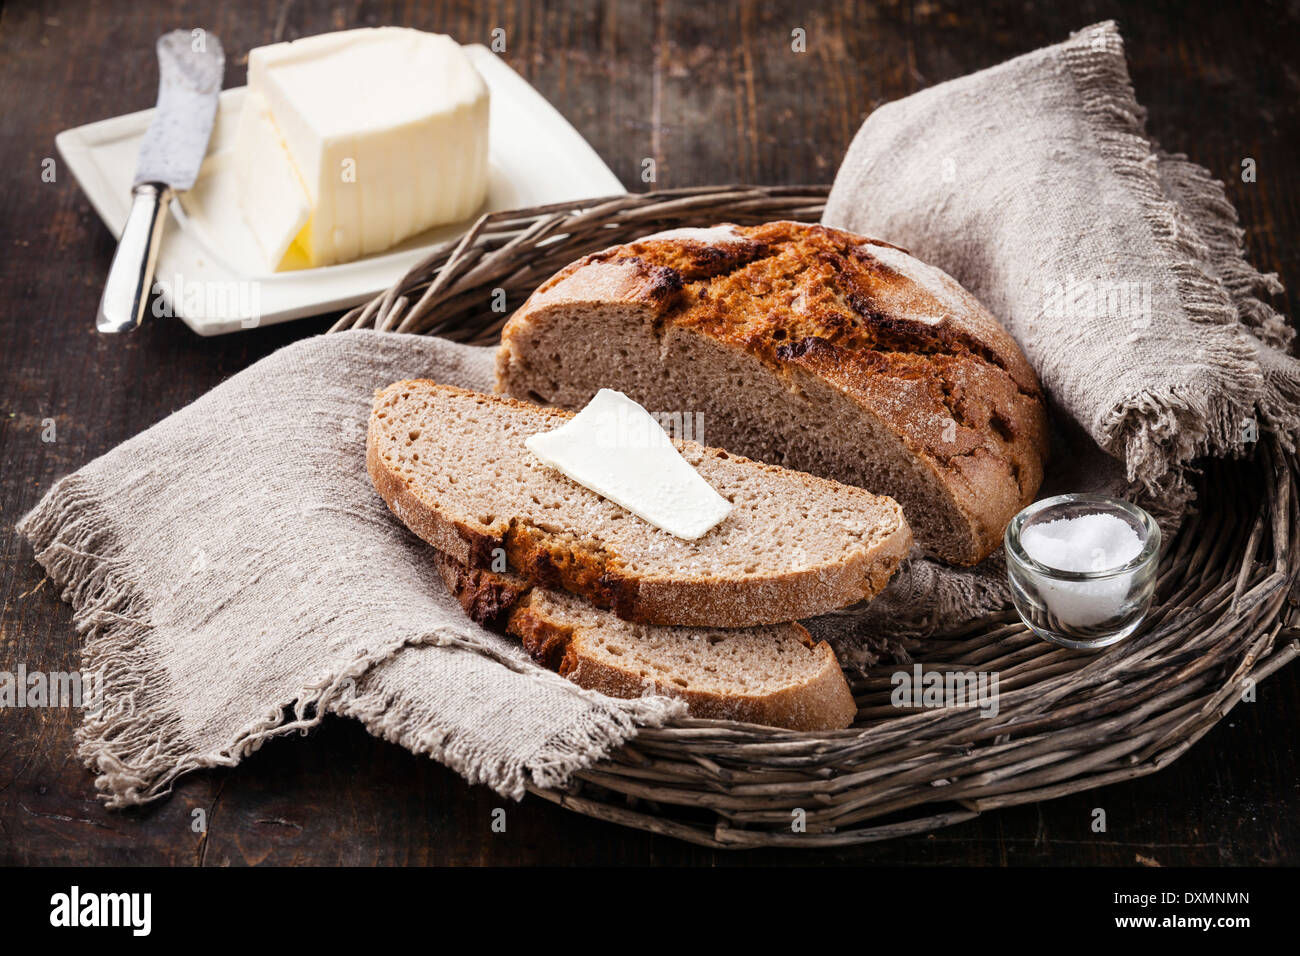 Rye sliced bread and butter on wooden table Stock Photo